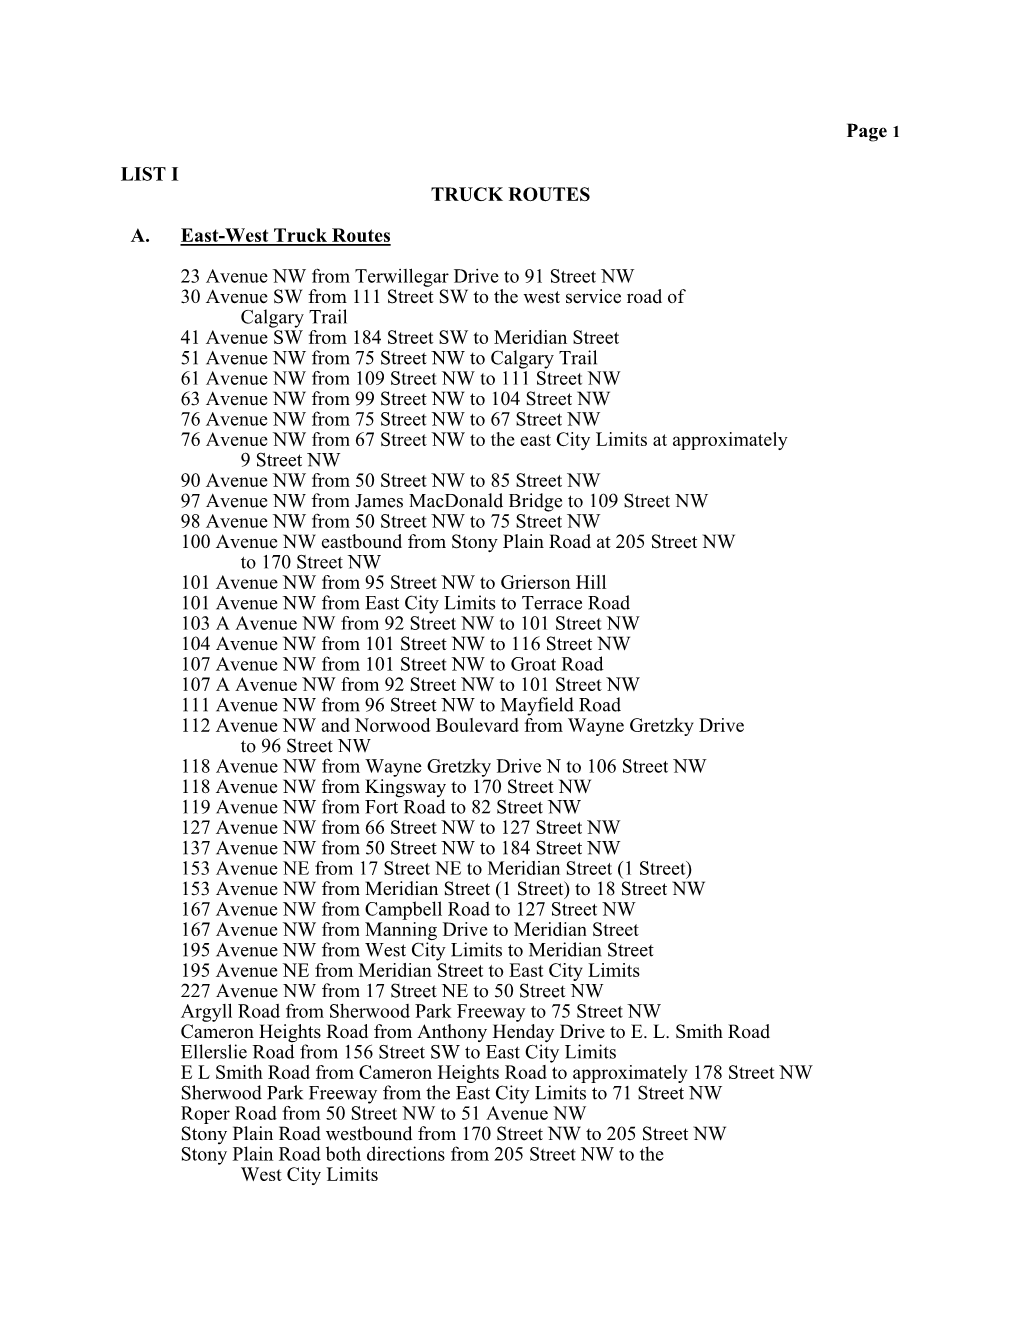 LIST I TRUCK ROUTES A. East-West Truck Routes 23 Avenue NW From